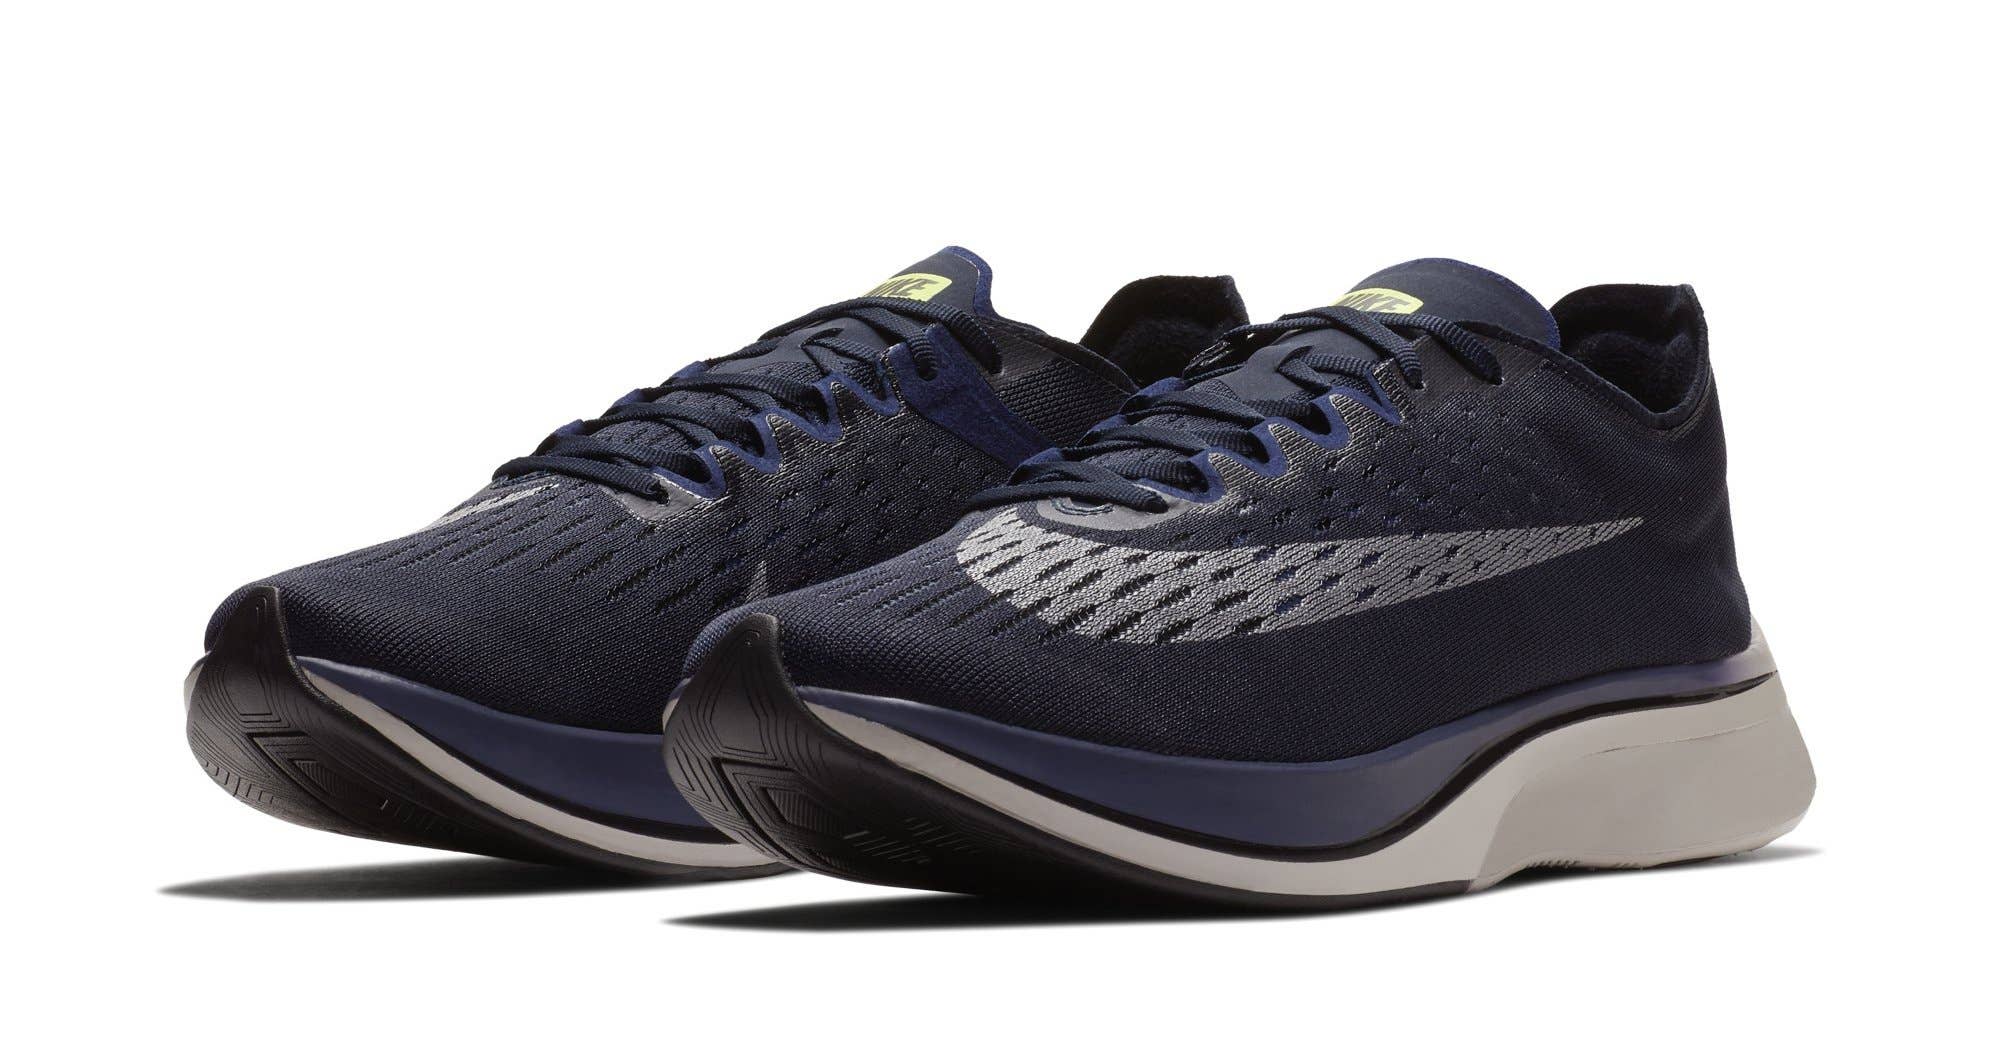 Bugt Imidlertid dybde Here's How to Get Your Hands on the New Nike Zoom Vaporfly 4% | Complex